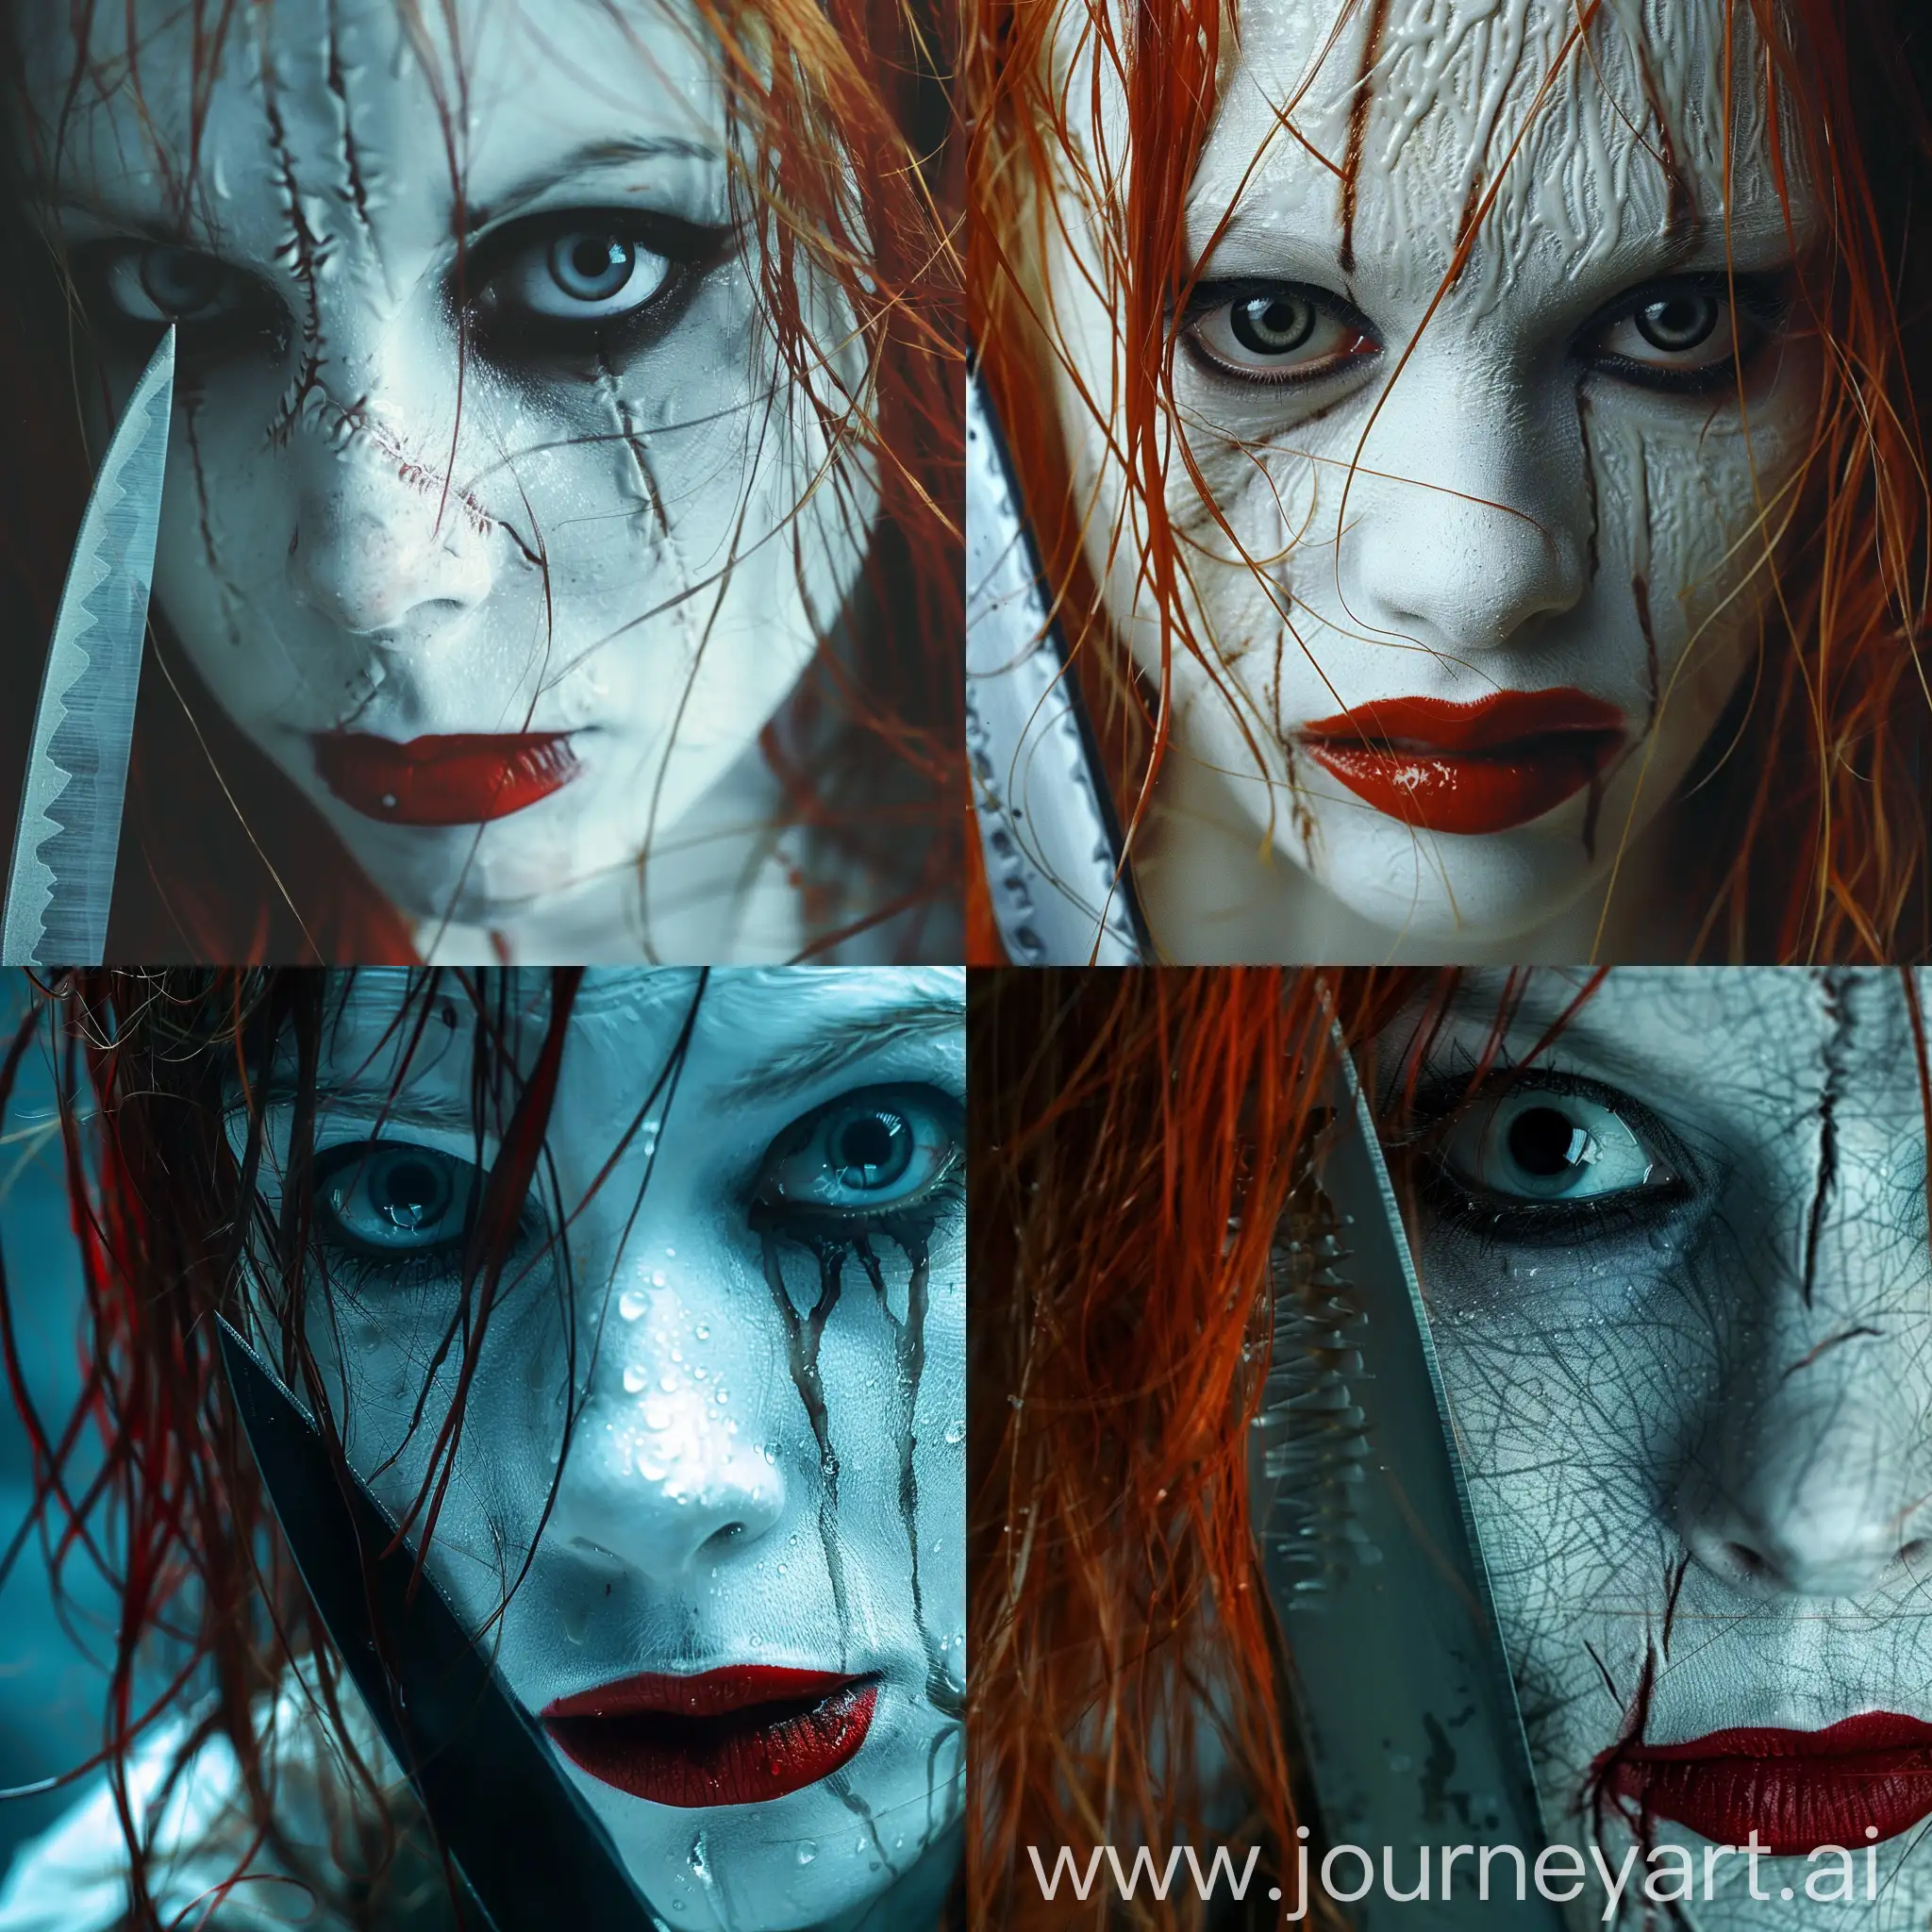 Woman with milky white skin, big plain black scary eyes, red lipstick, redhair, her hair is wet, has straches on her face, knife, scary movie scene, cinematic lighting, realistic image